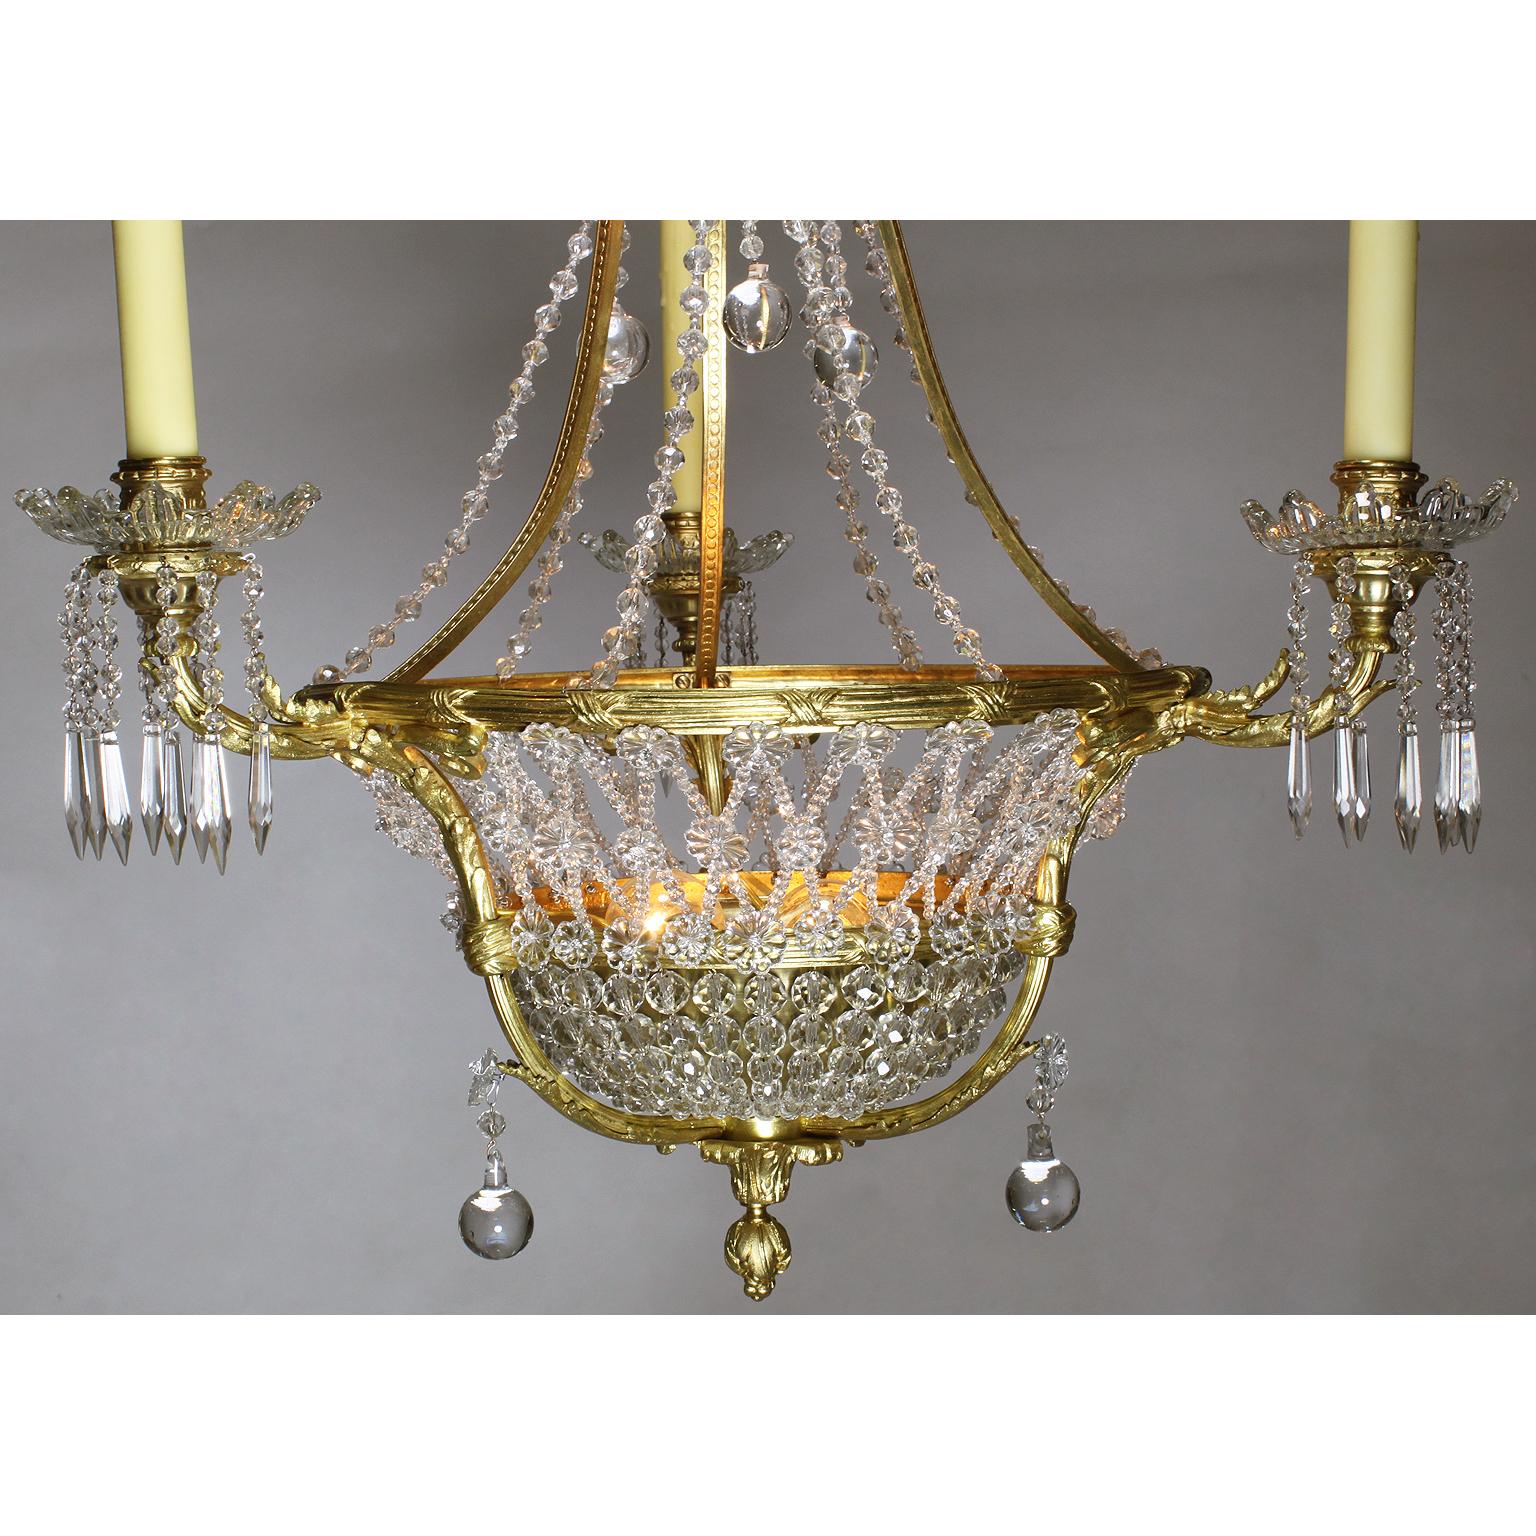 A fine French Belle Époque 19th-20th century three-light gilt-bronze and cut-glass basket chandelier. The circular basket shaped banded gilt-bronze frame surmounted with three scrolled candle-arms and two interior lights, all decorated with weaved